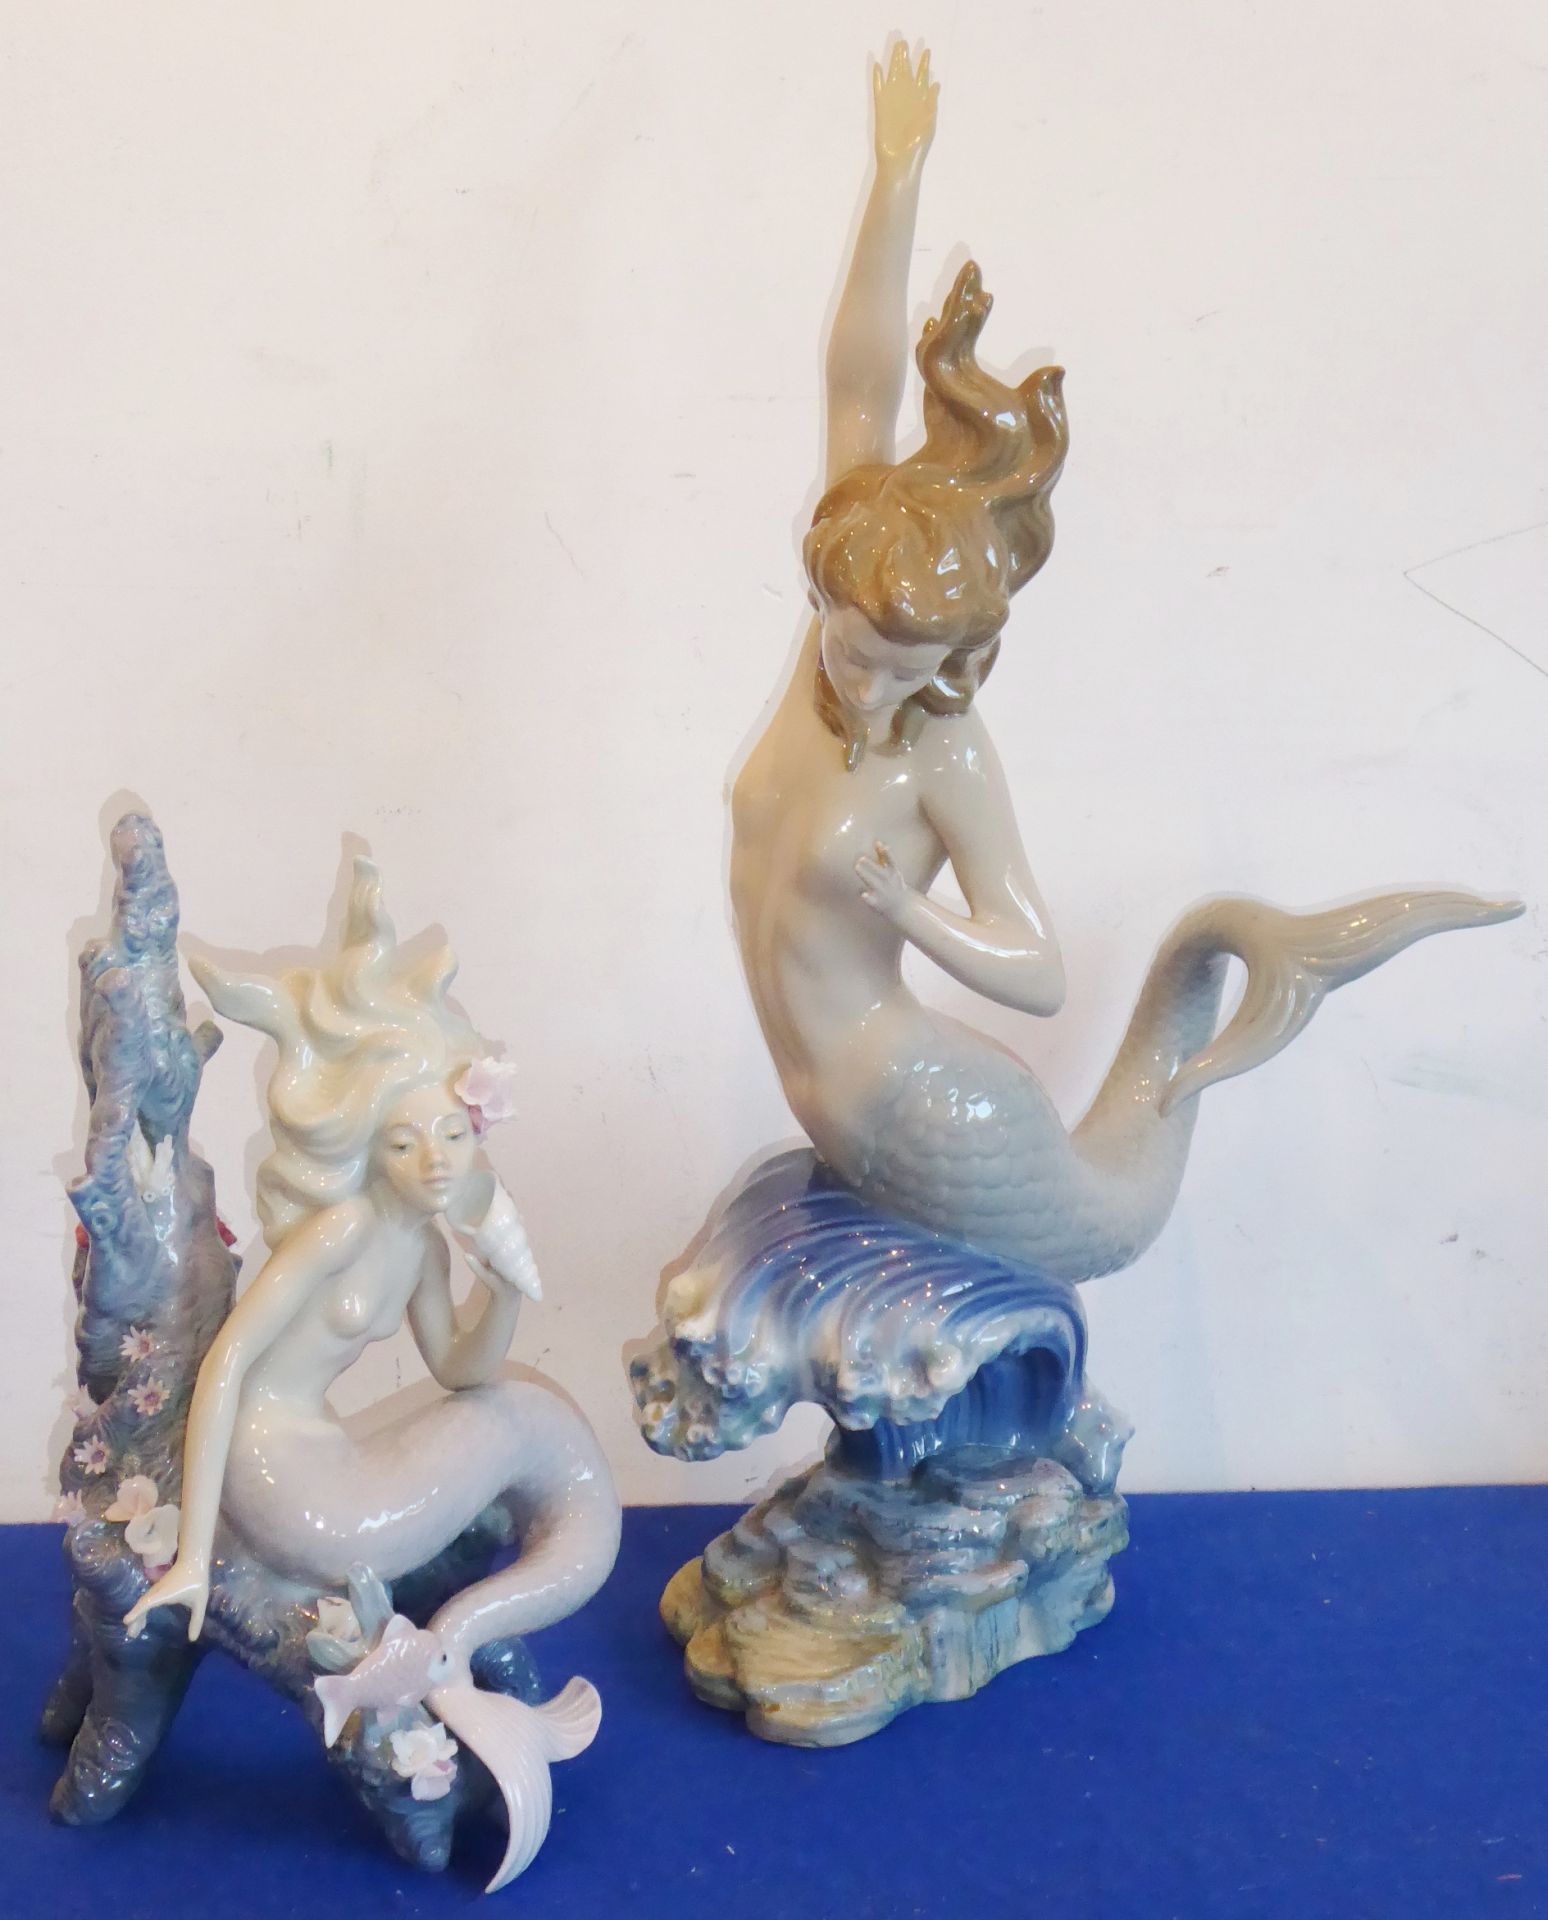 Lladro porcelain, 'Mermaid on a Wave' (No. 1347) together with 'Ocean Beauty' (No.